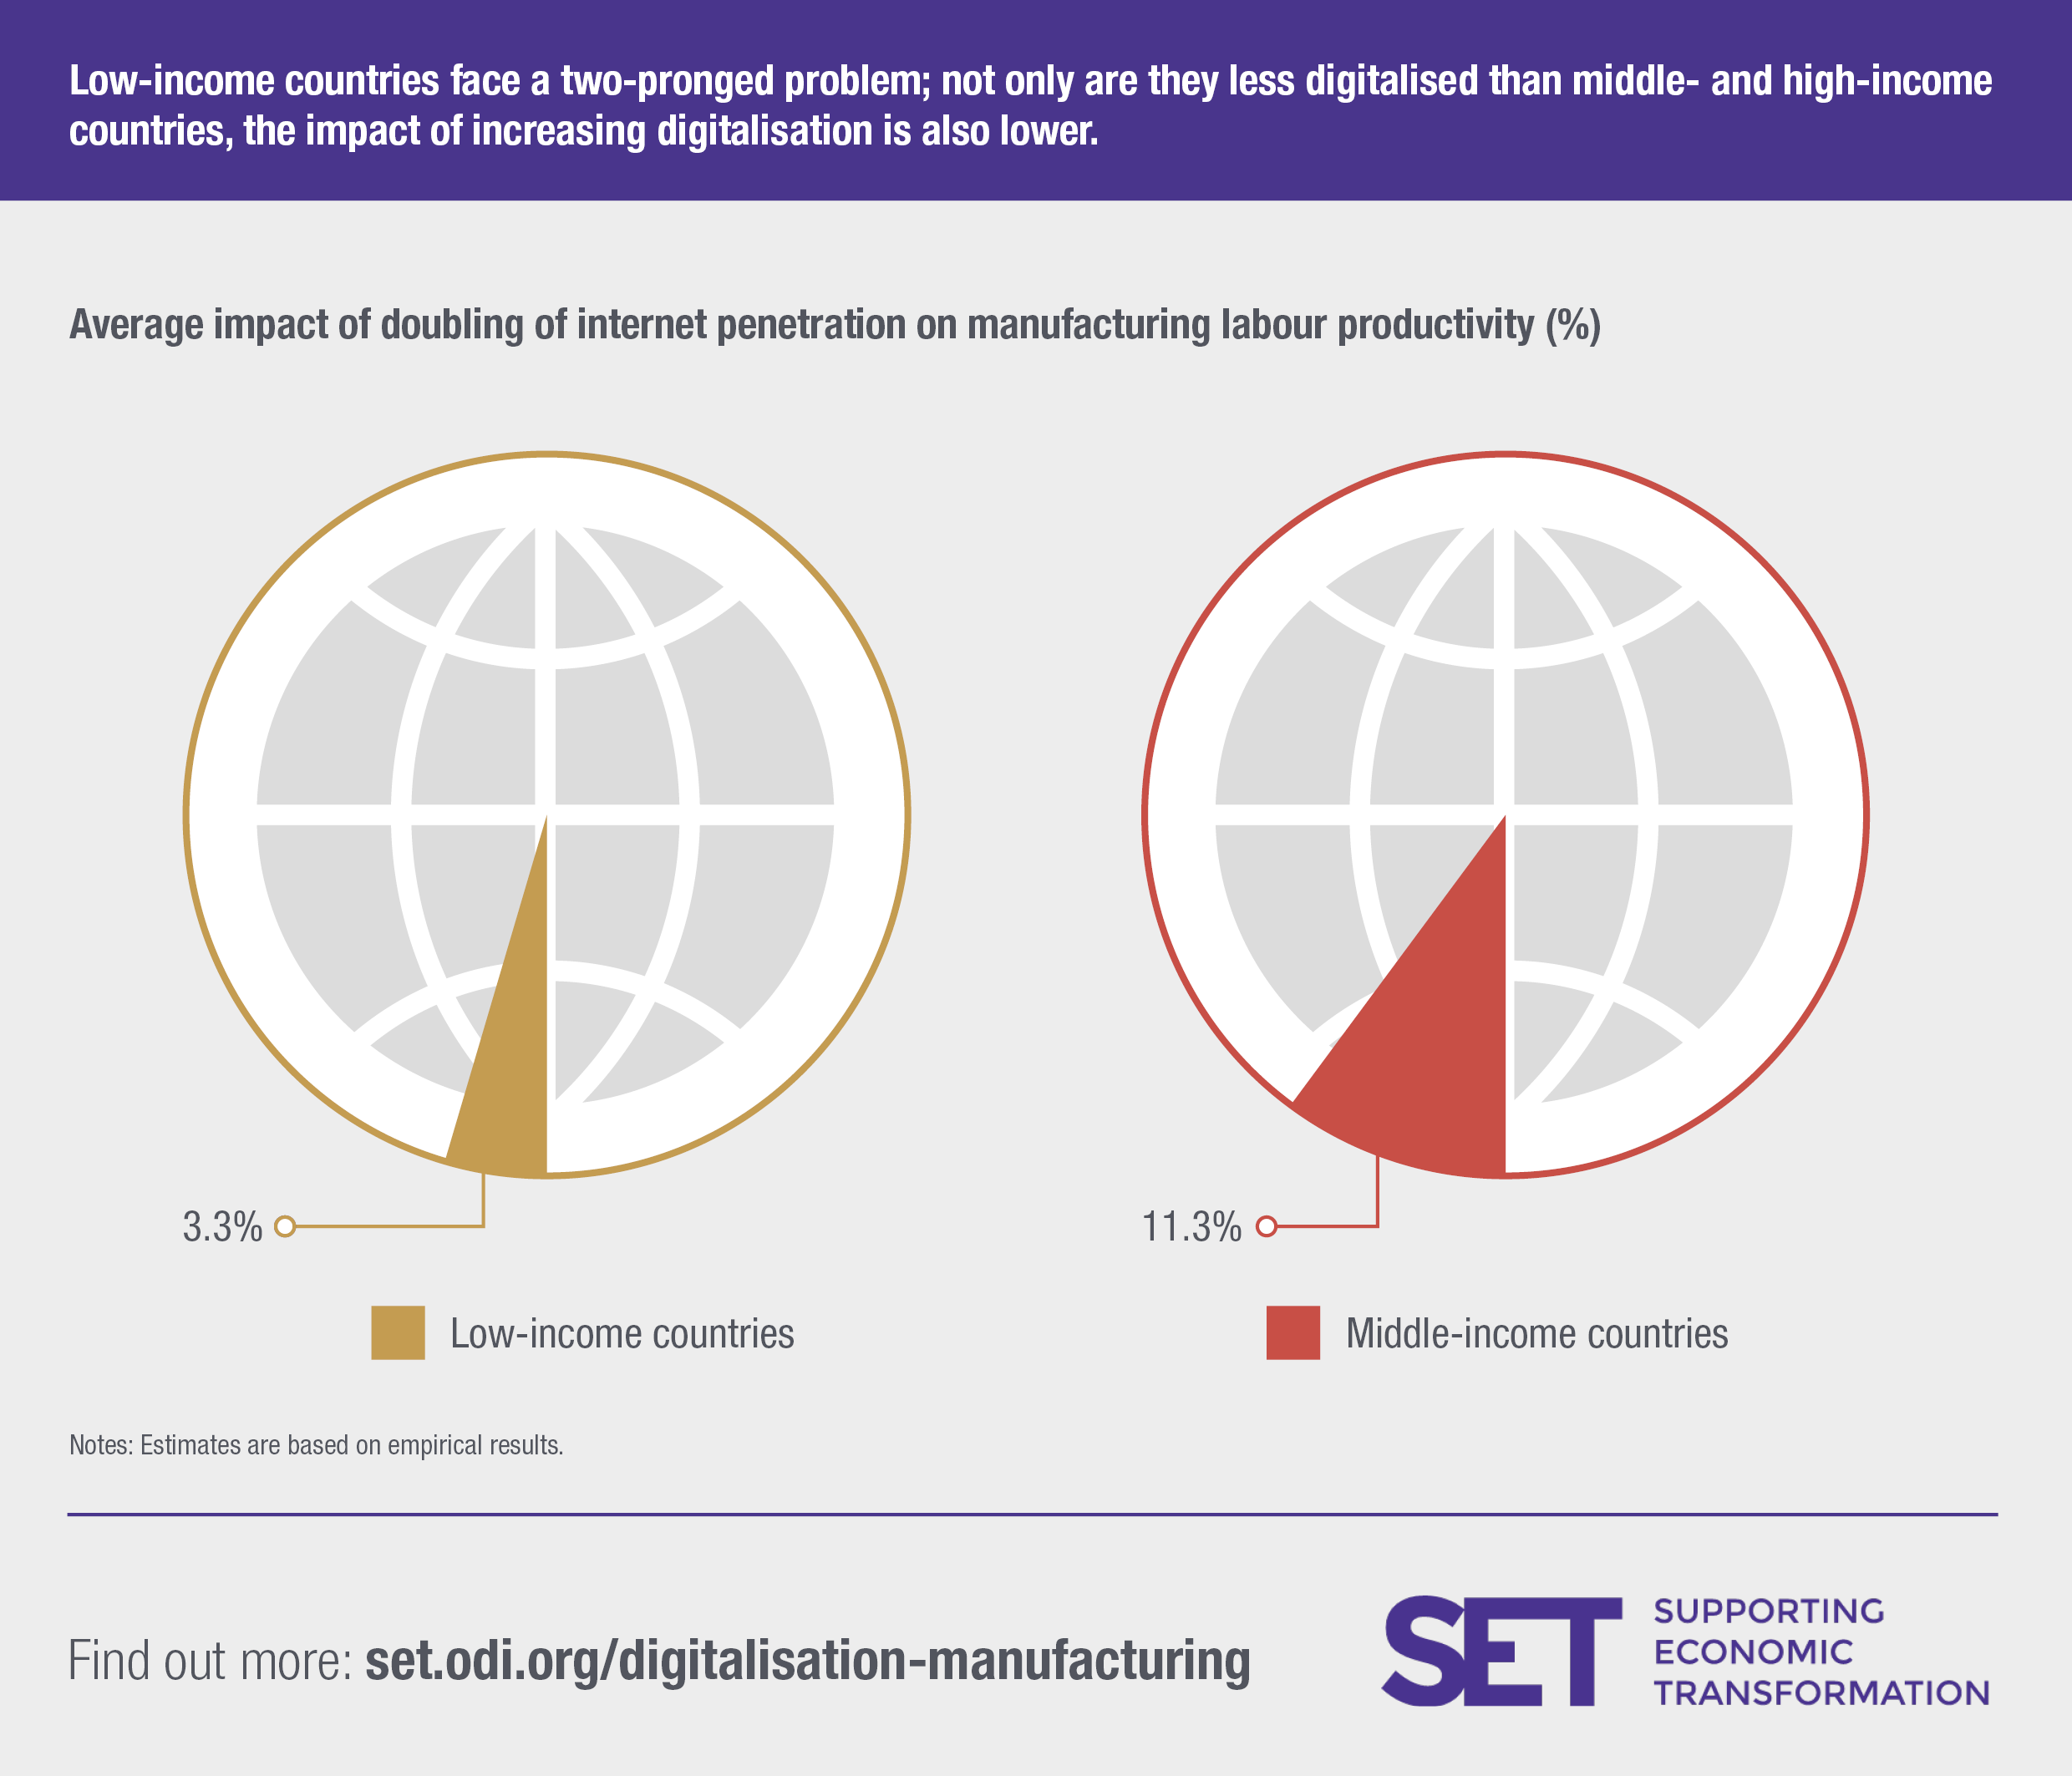 Not only are developing countries less digitalised, the impact of digitalisation on productivity is also less than in middle-income countries. Image: SET programme.